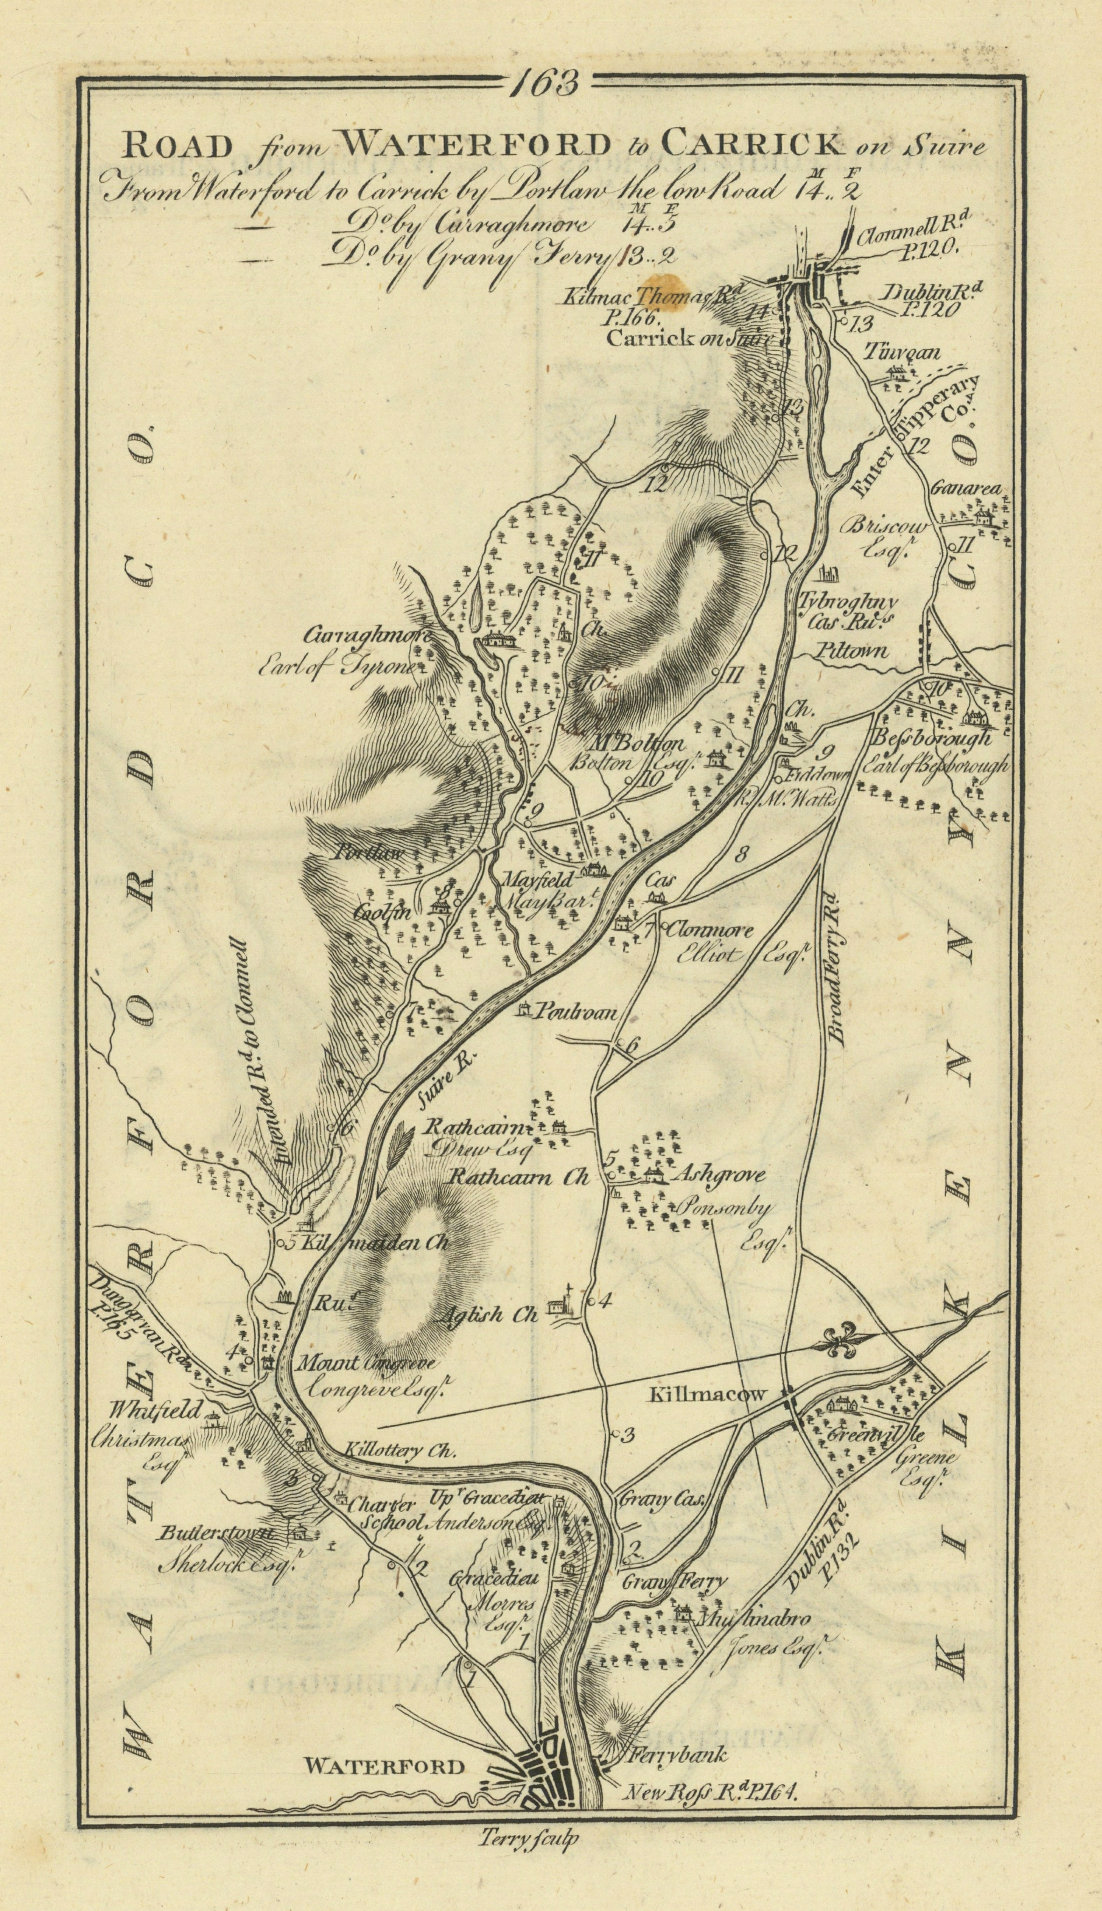 #163 Waterford to Carrick-on-Suir. Kilmacow Kilkenny. TAYLOR/SKINNER 1778 map